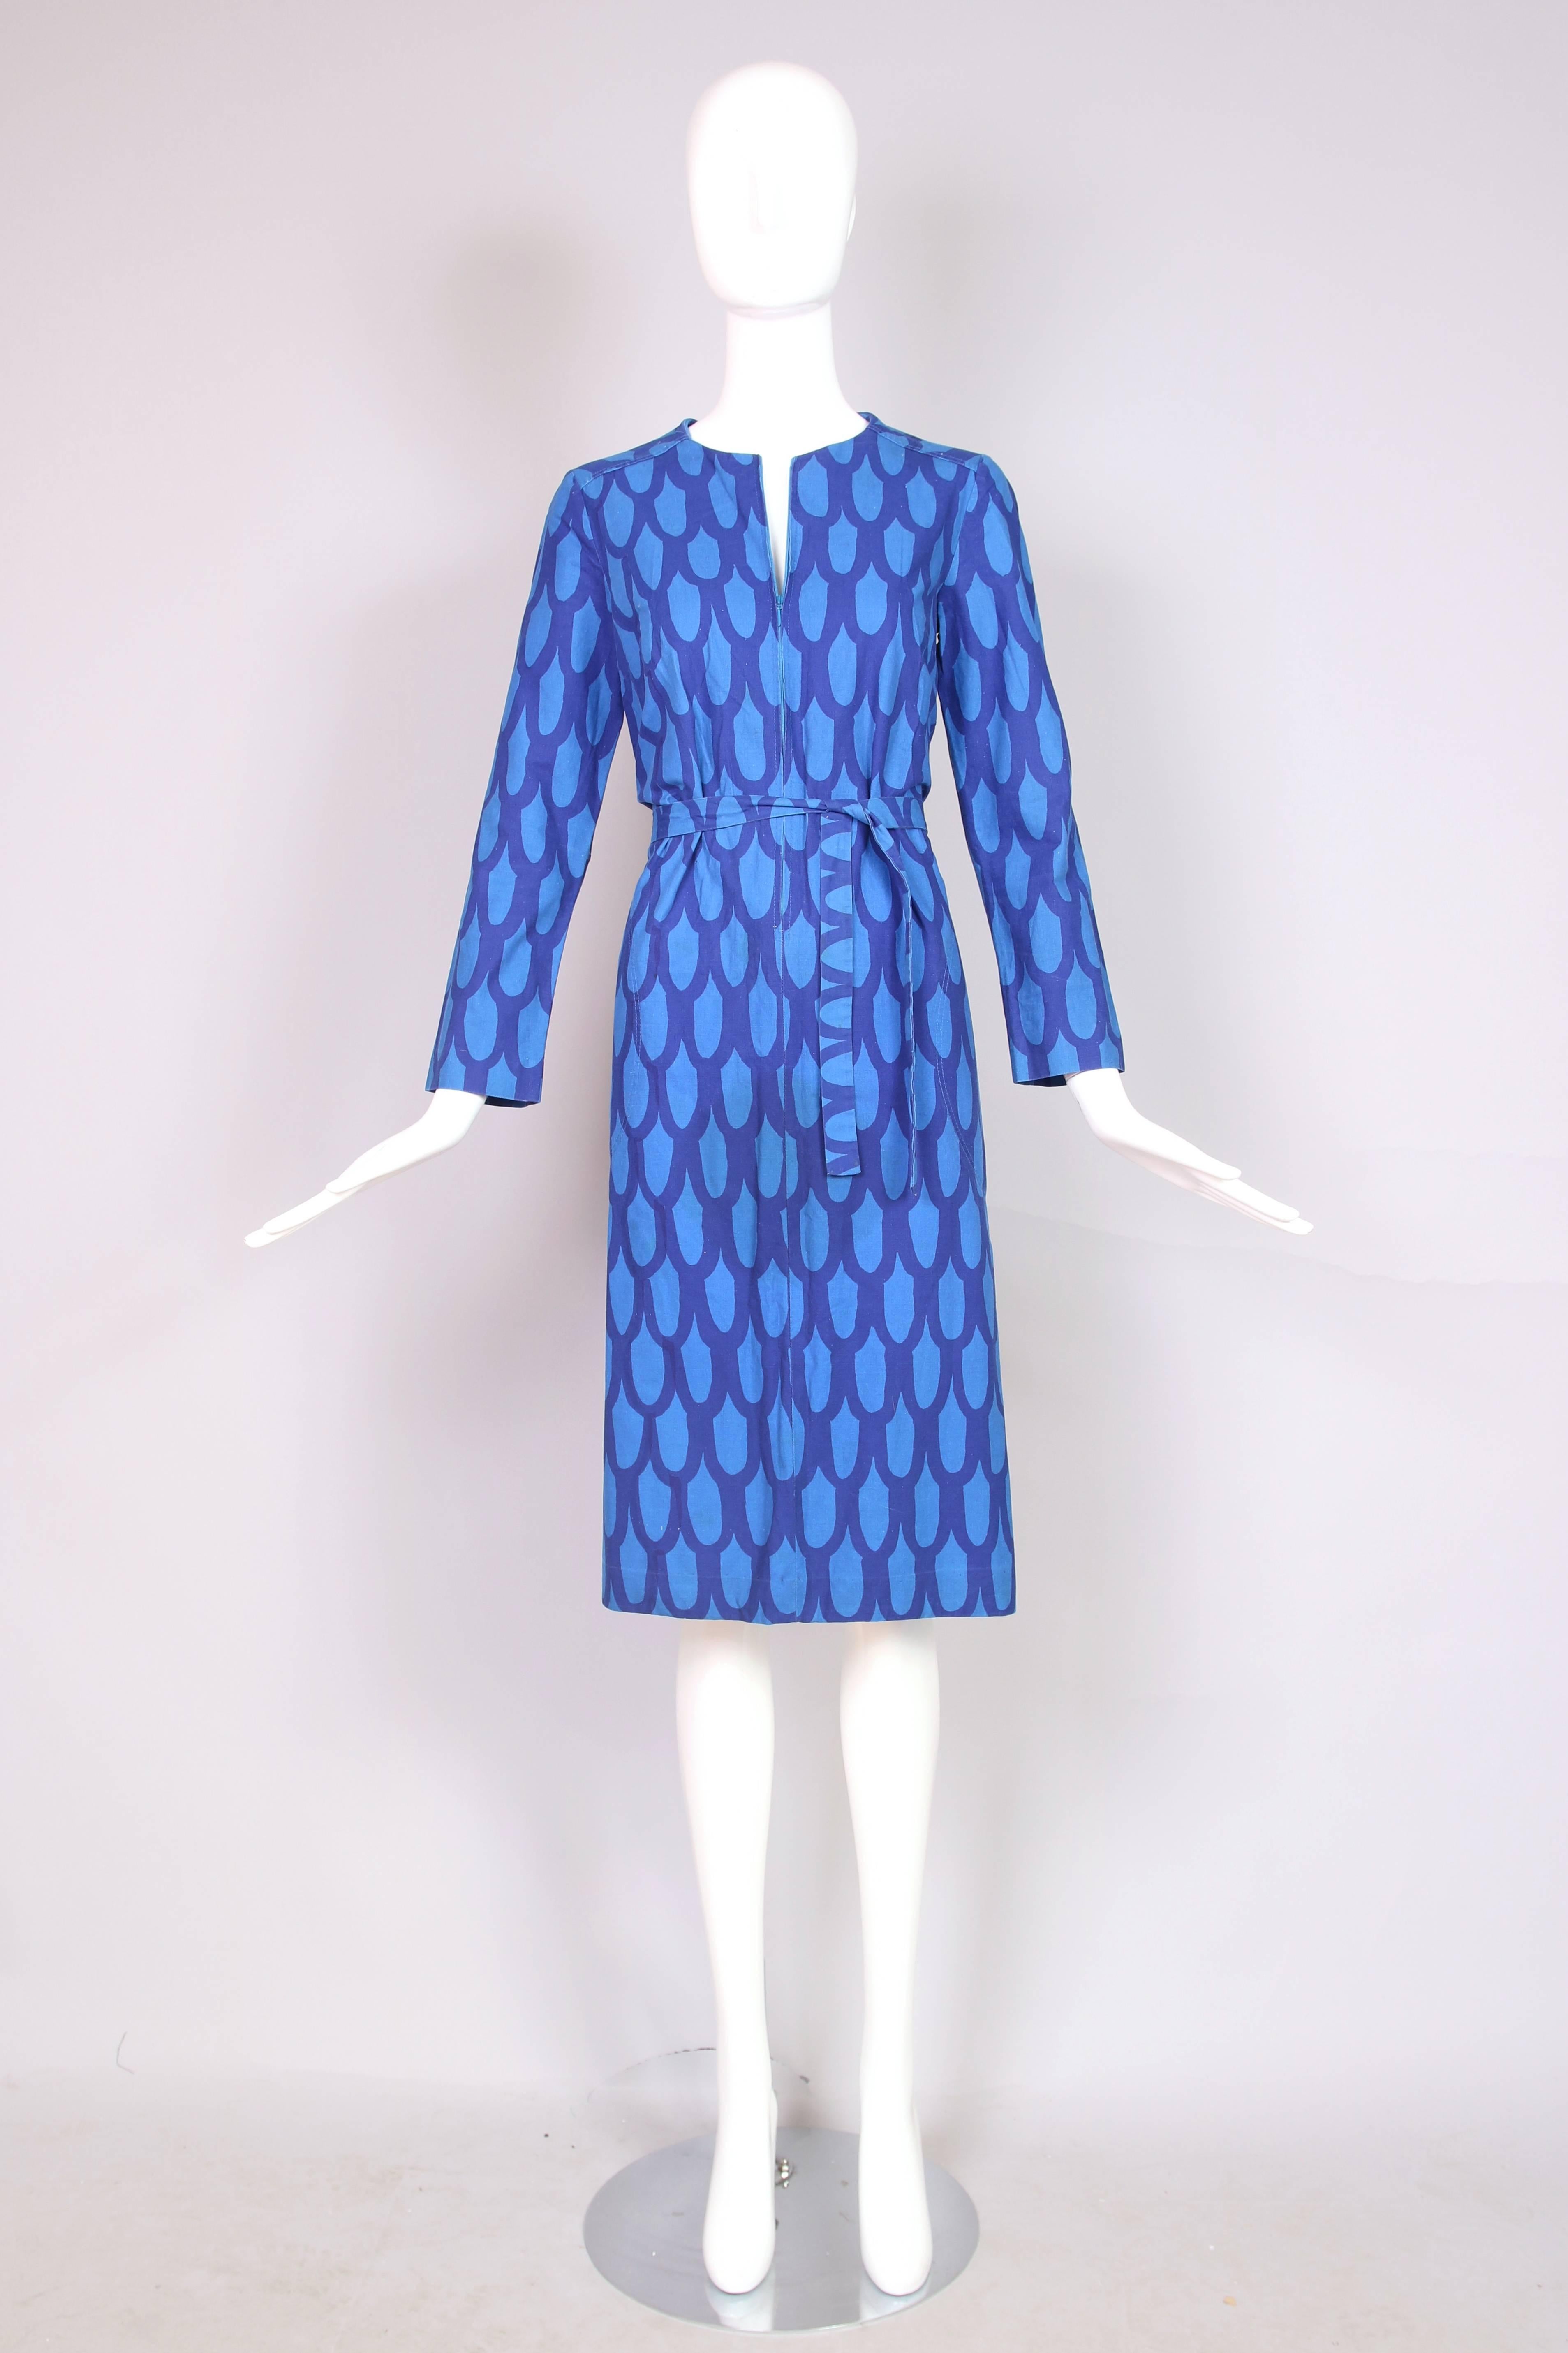 1970's Marimekko blue cotton long sleeved shift day dress with repeating geometric print, front zipper closure and self tie belt. In excellent condition. No size tag, please see measurements.
MEASUREMENTS:
Bust - 35